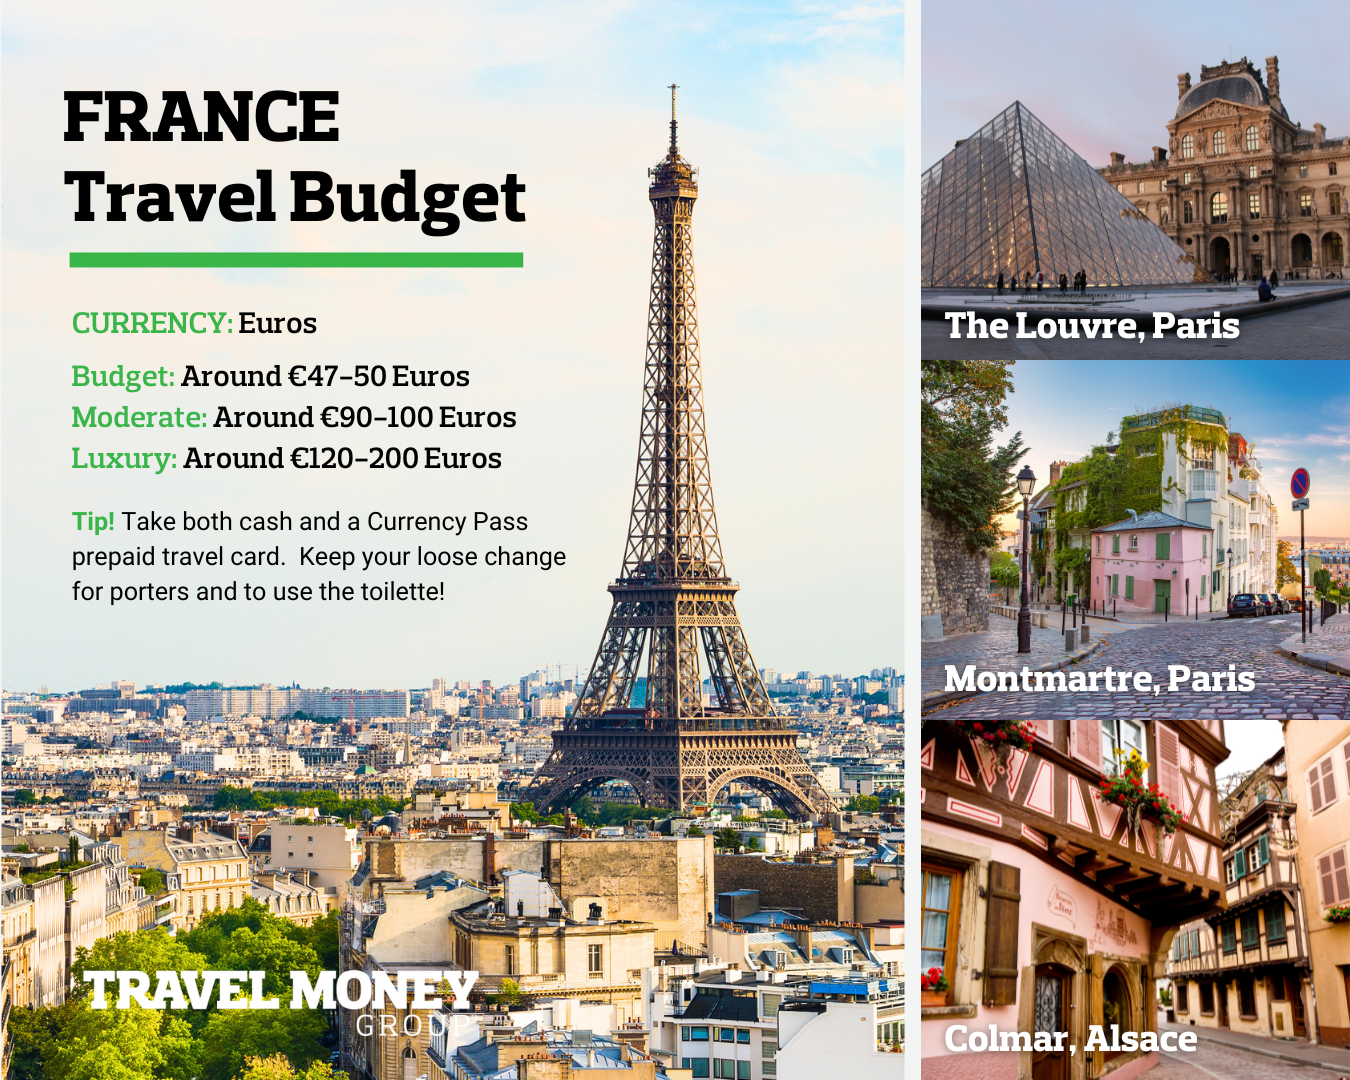 France Travel Budget Infographic